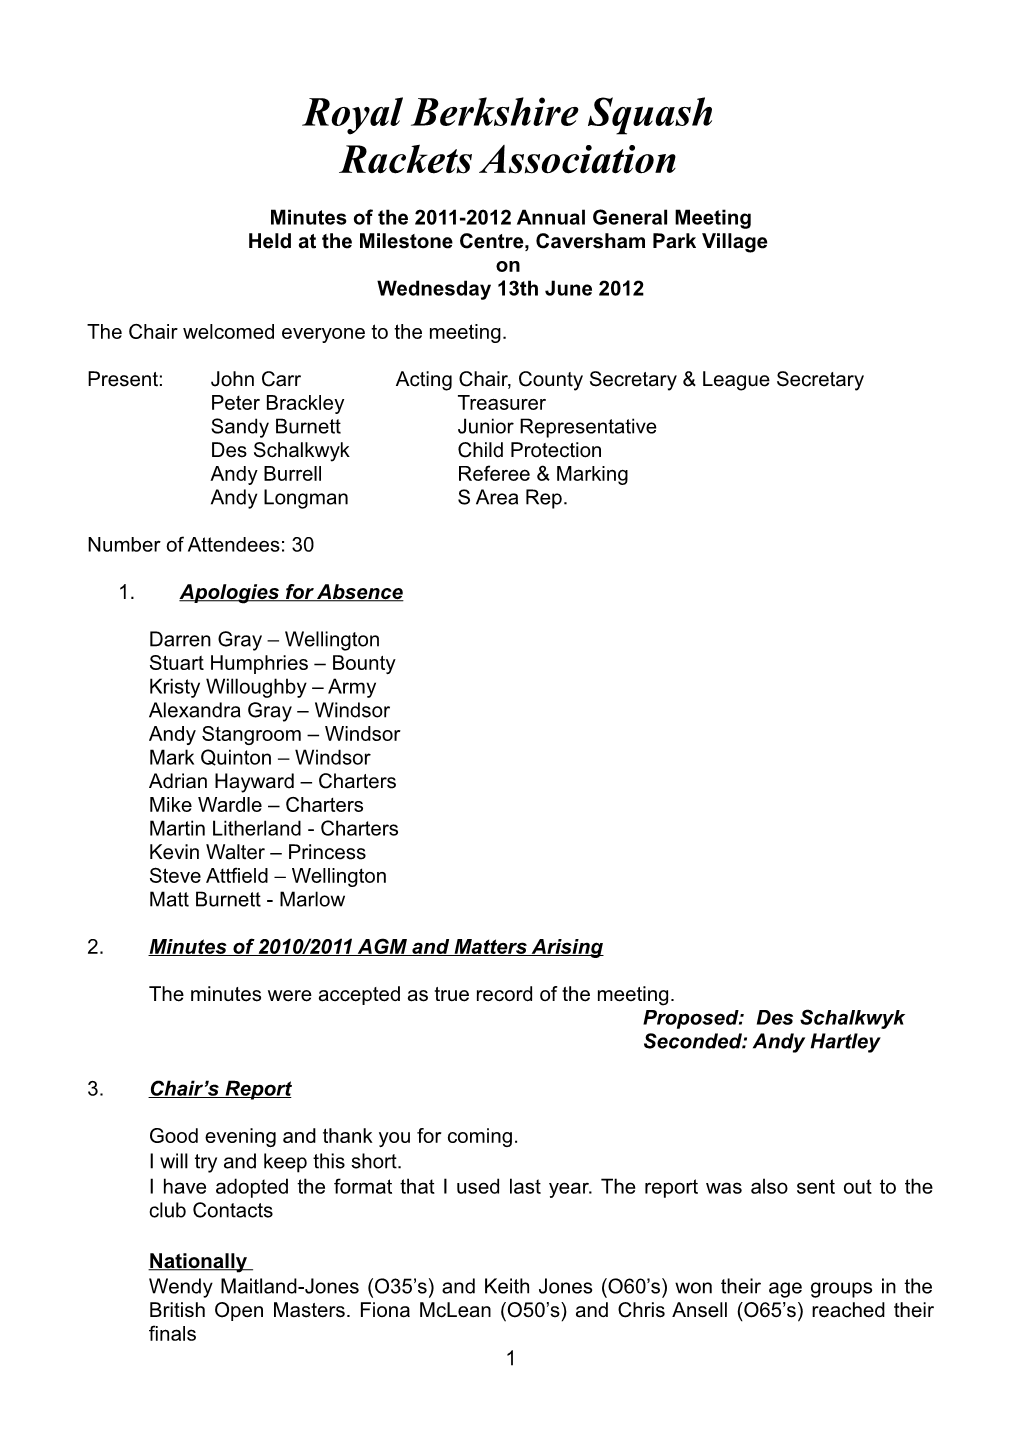 Minutes of the 2011-2012 Annual General Meeting